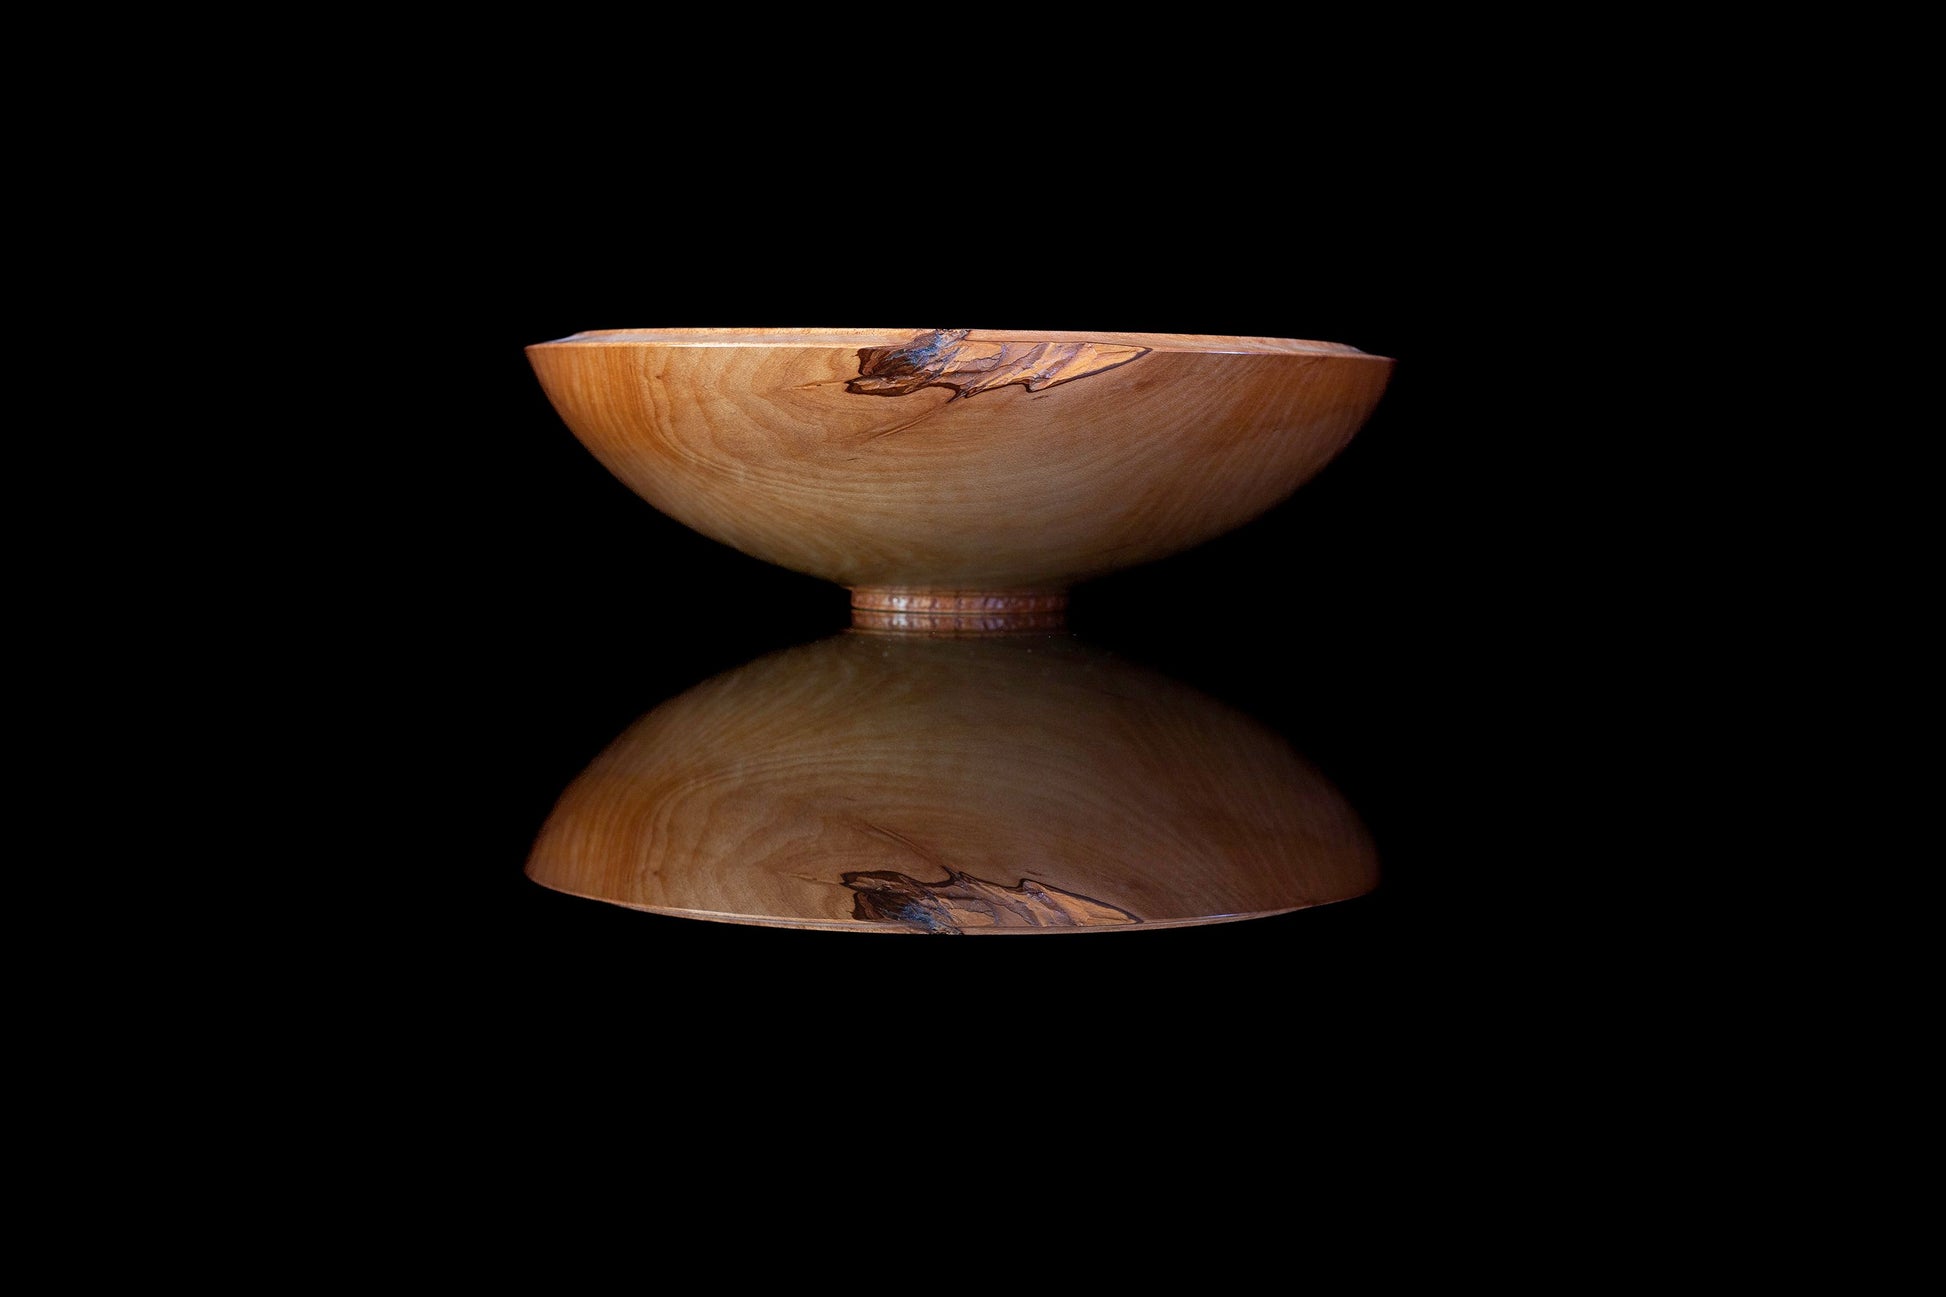 Rhododendron Wood Bowl by Woodturner Mark Russell No206